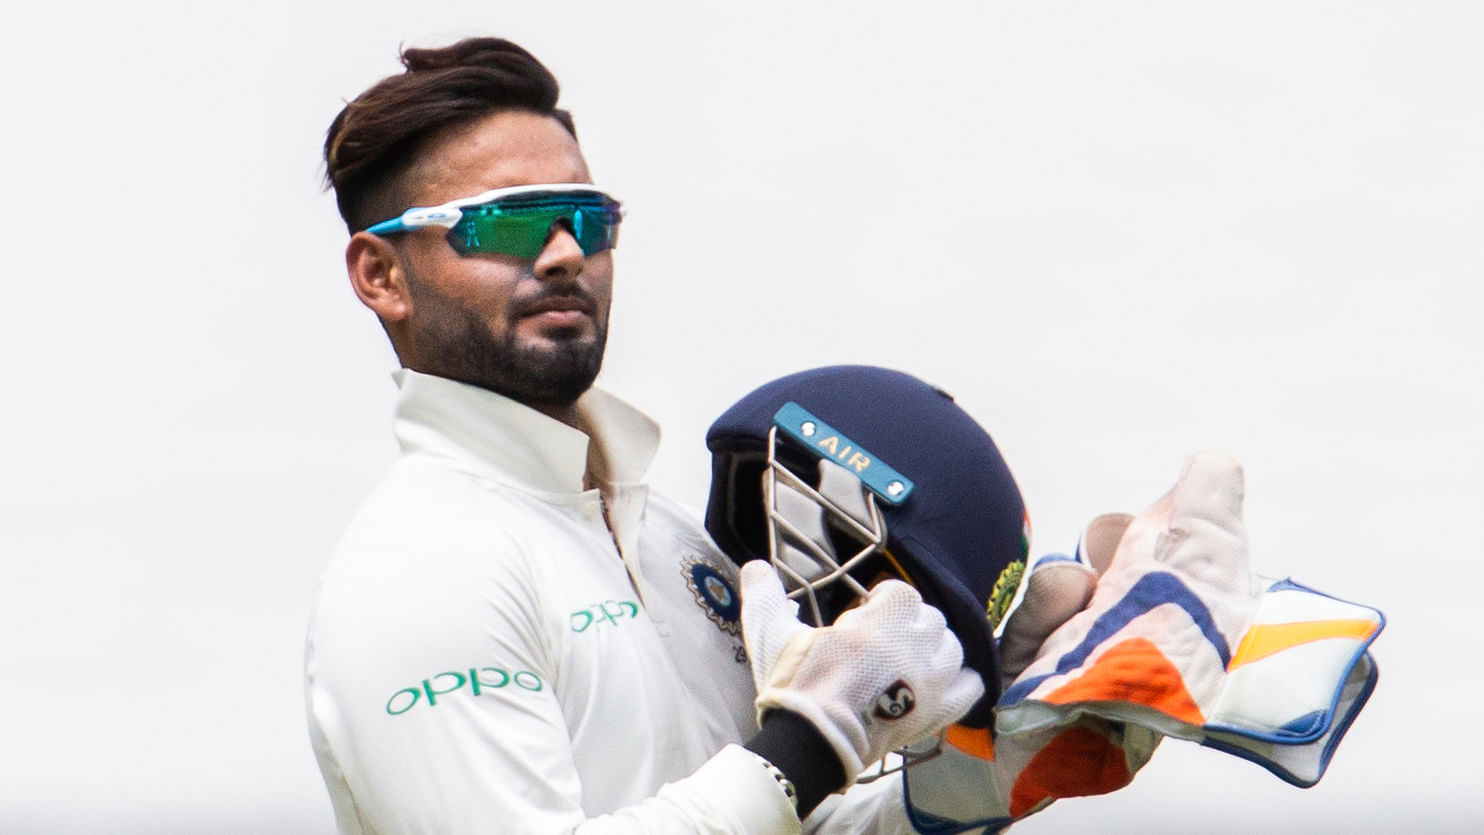  Rishabh Pant got hit on his elbow while batting in the first innings of the SCG Test.